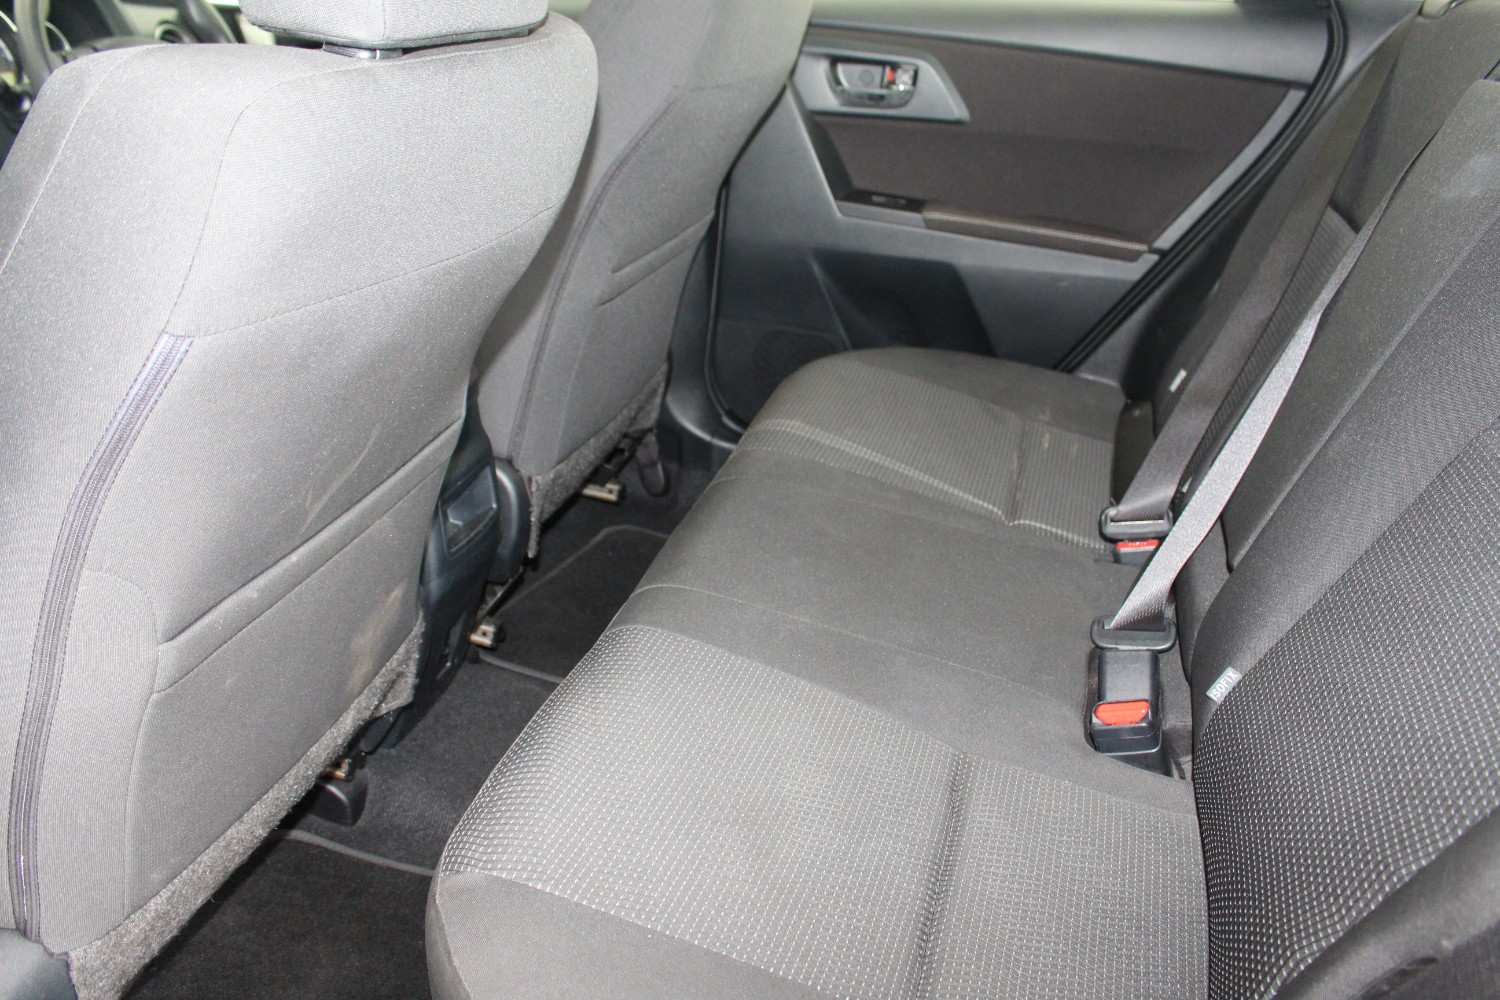 2015 Toyota Corolla ZRE182R ASCENT Hatch Image 11